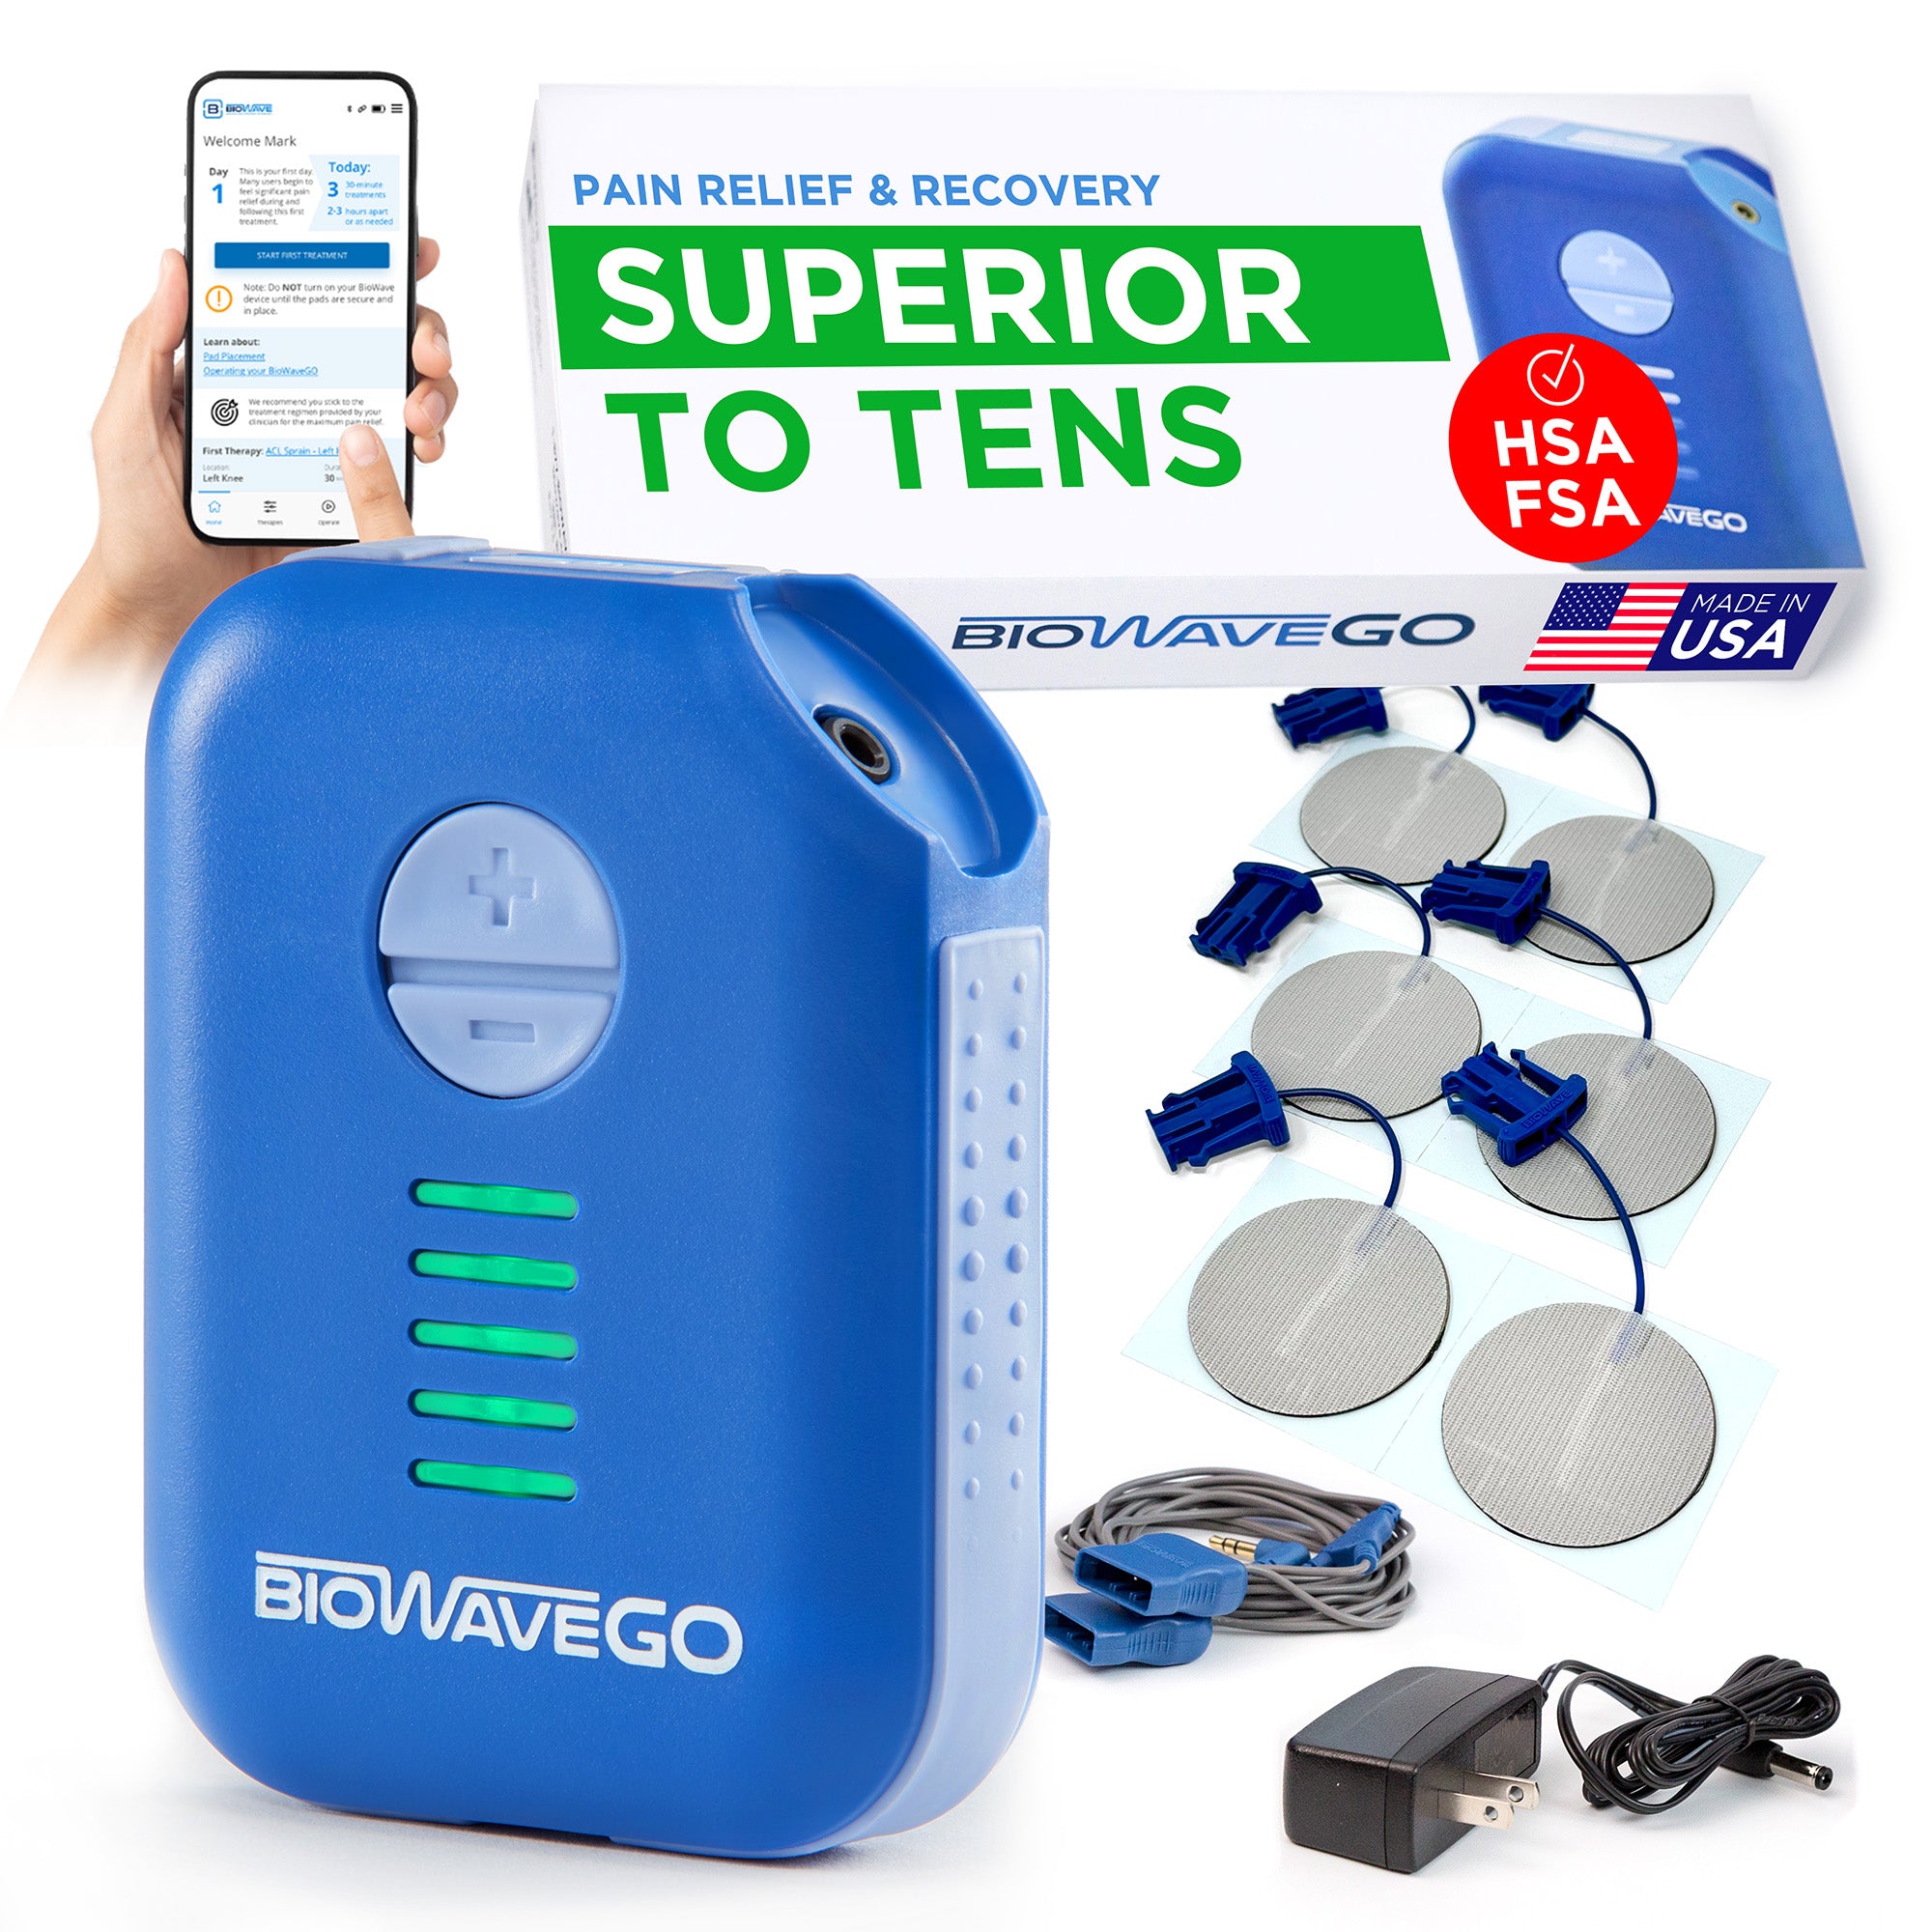 BIOWAVEGO - Clinically Proven Neurostim Device for People Suffering from Acute or Chronic Pain - FSA Eligible, Alternative to TENS Unit, ESTIM, PEMF Therapy Devices & TENS Machines for Pain Relief